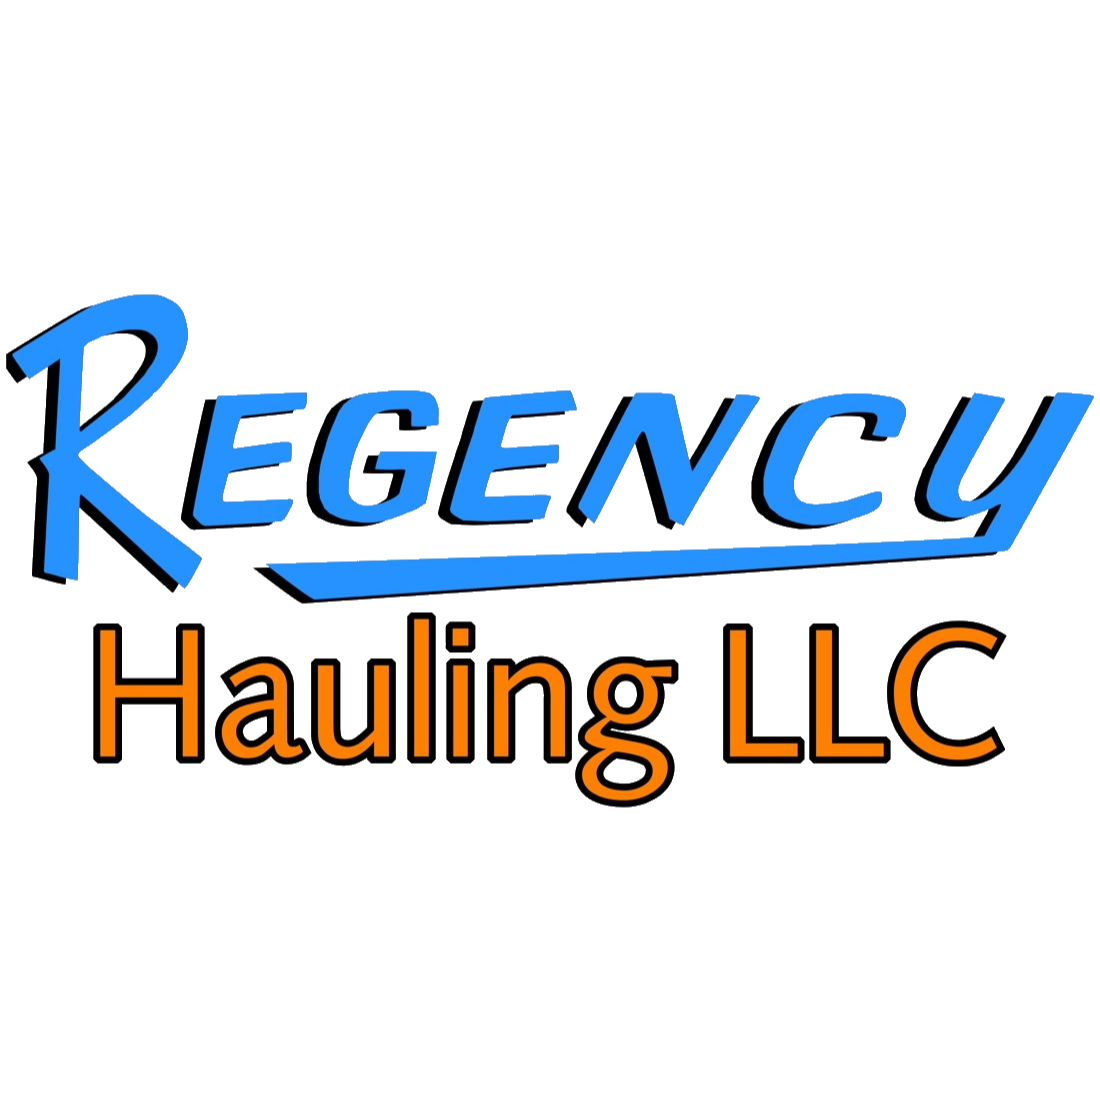 Regency Hauling - Mooresville, NC 28117 - (980)270-2373 | ShowMeLocal.com